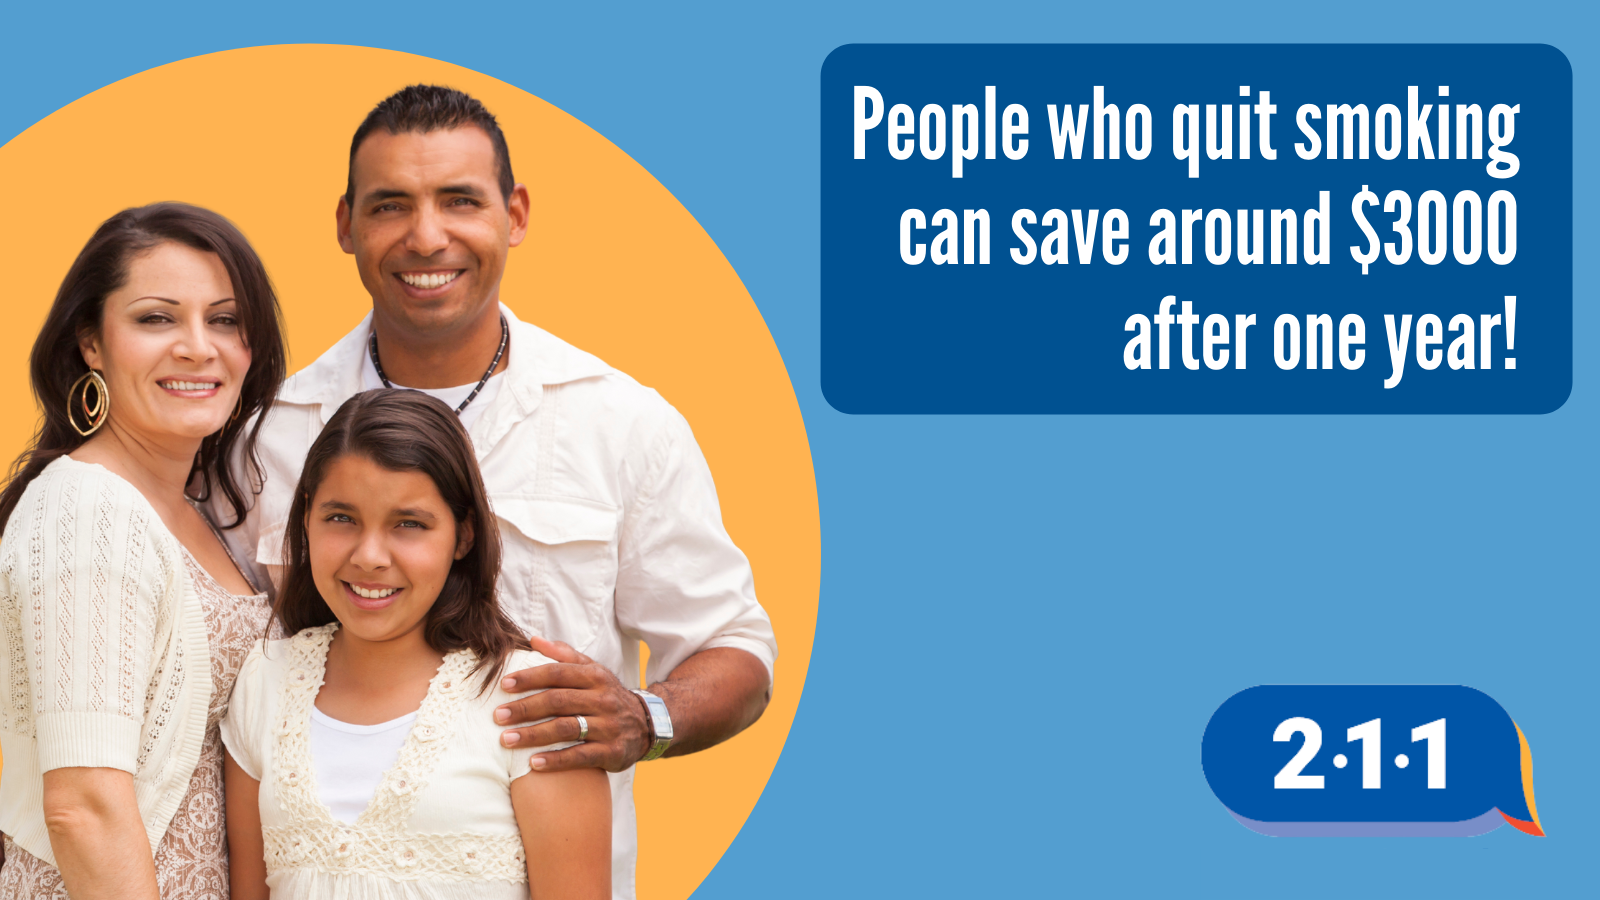 Hispanic smiling family and text: People who quit smoking can save around $3000 after one year! 2-1-1